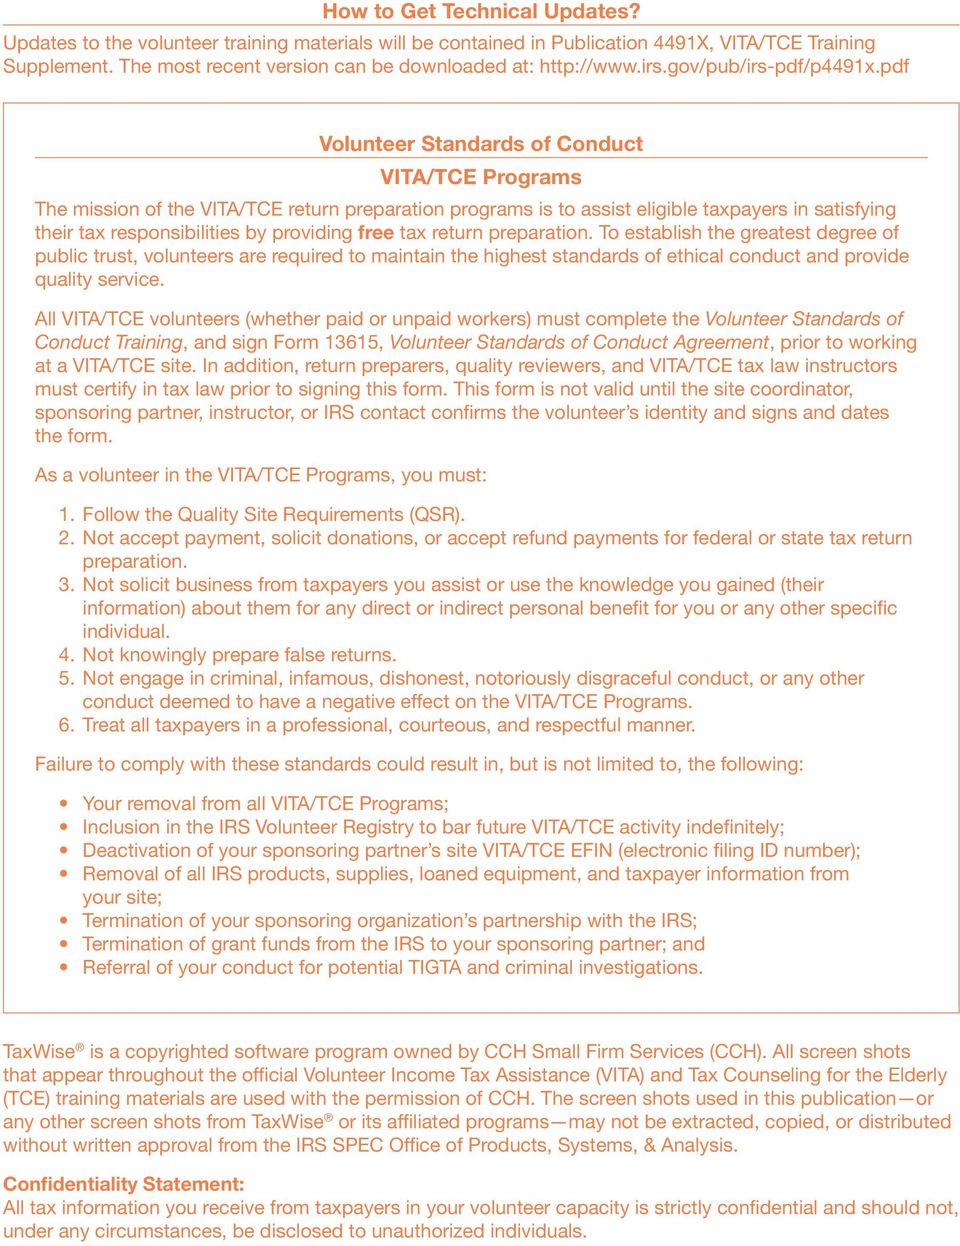 pdf Volunteer Standards of Conduct VITA/TCE Programs The mission of the VITA/TCE return preparation programs is to assist eligible taxpayers in satisfying their tax responsibilities by providing free